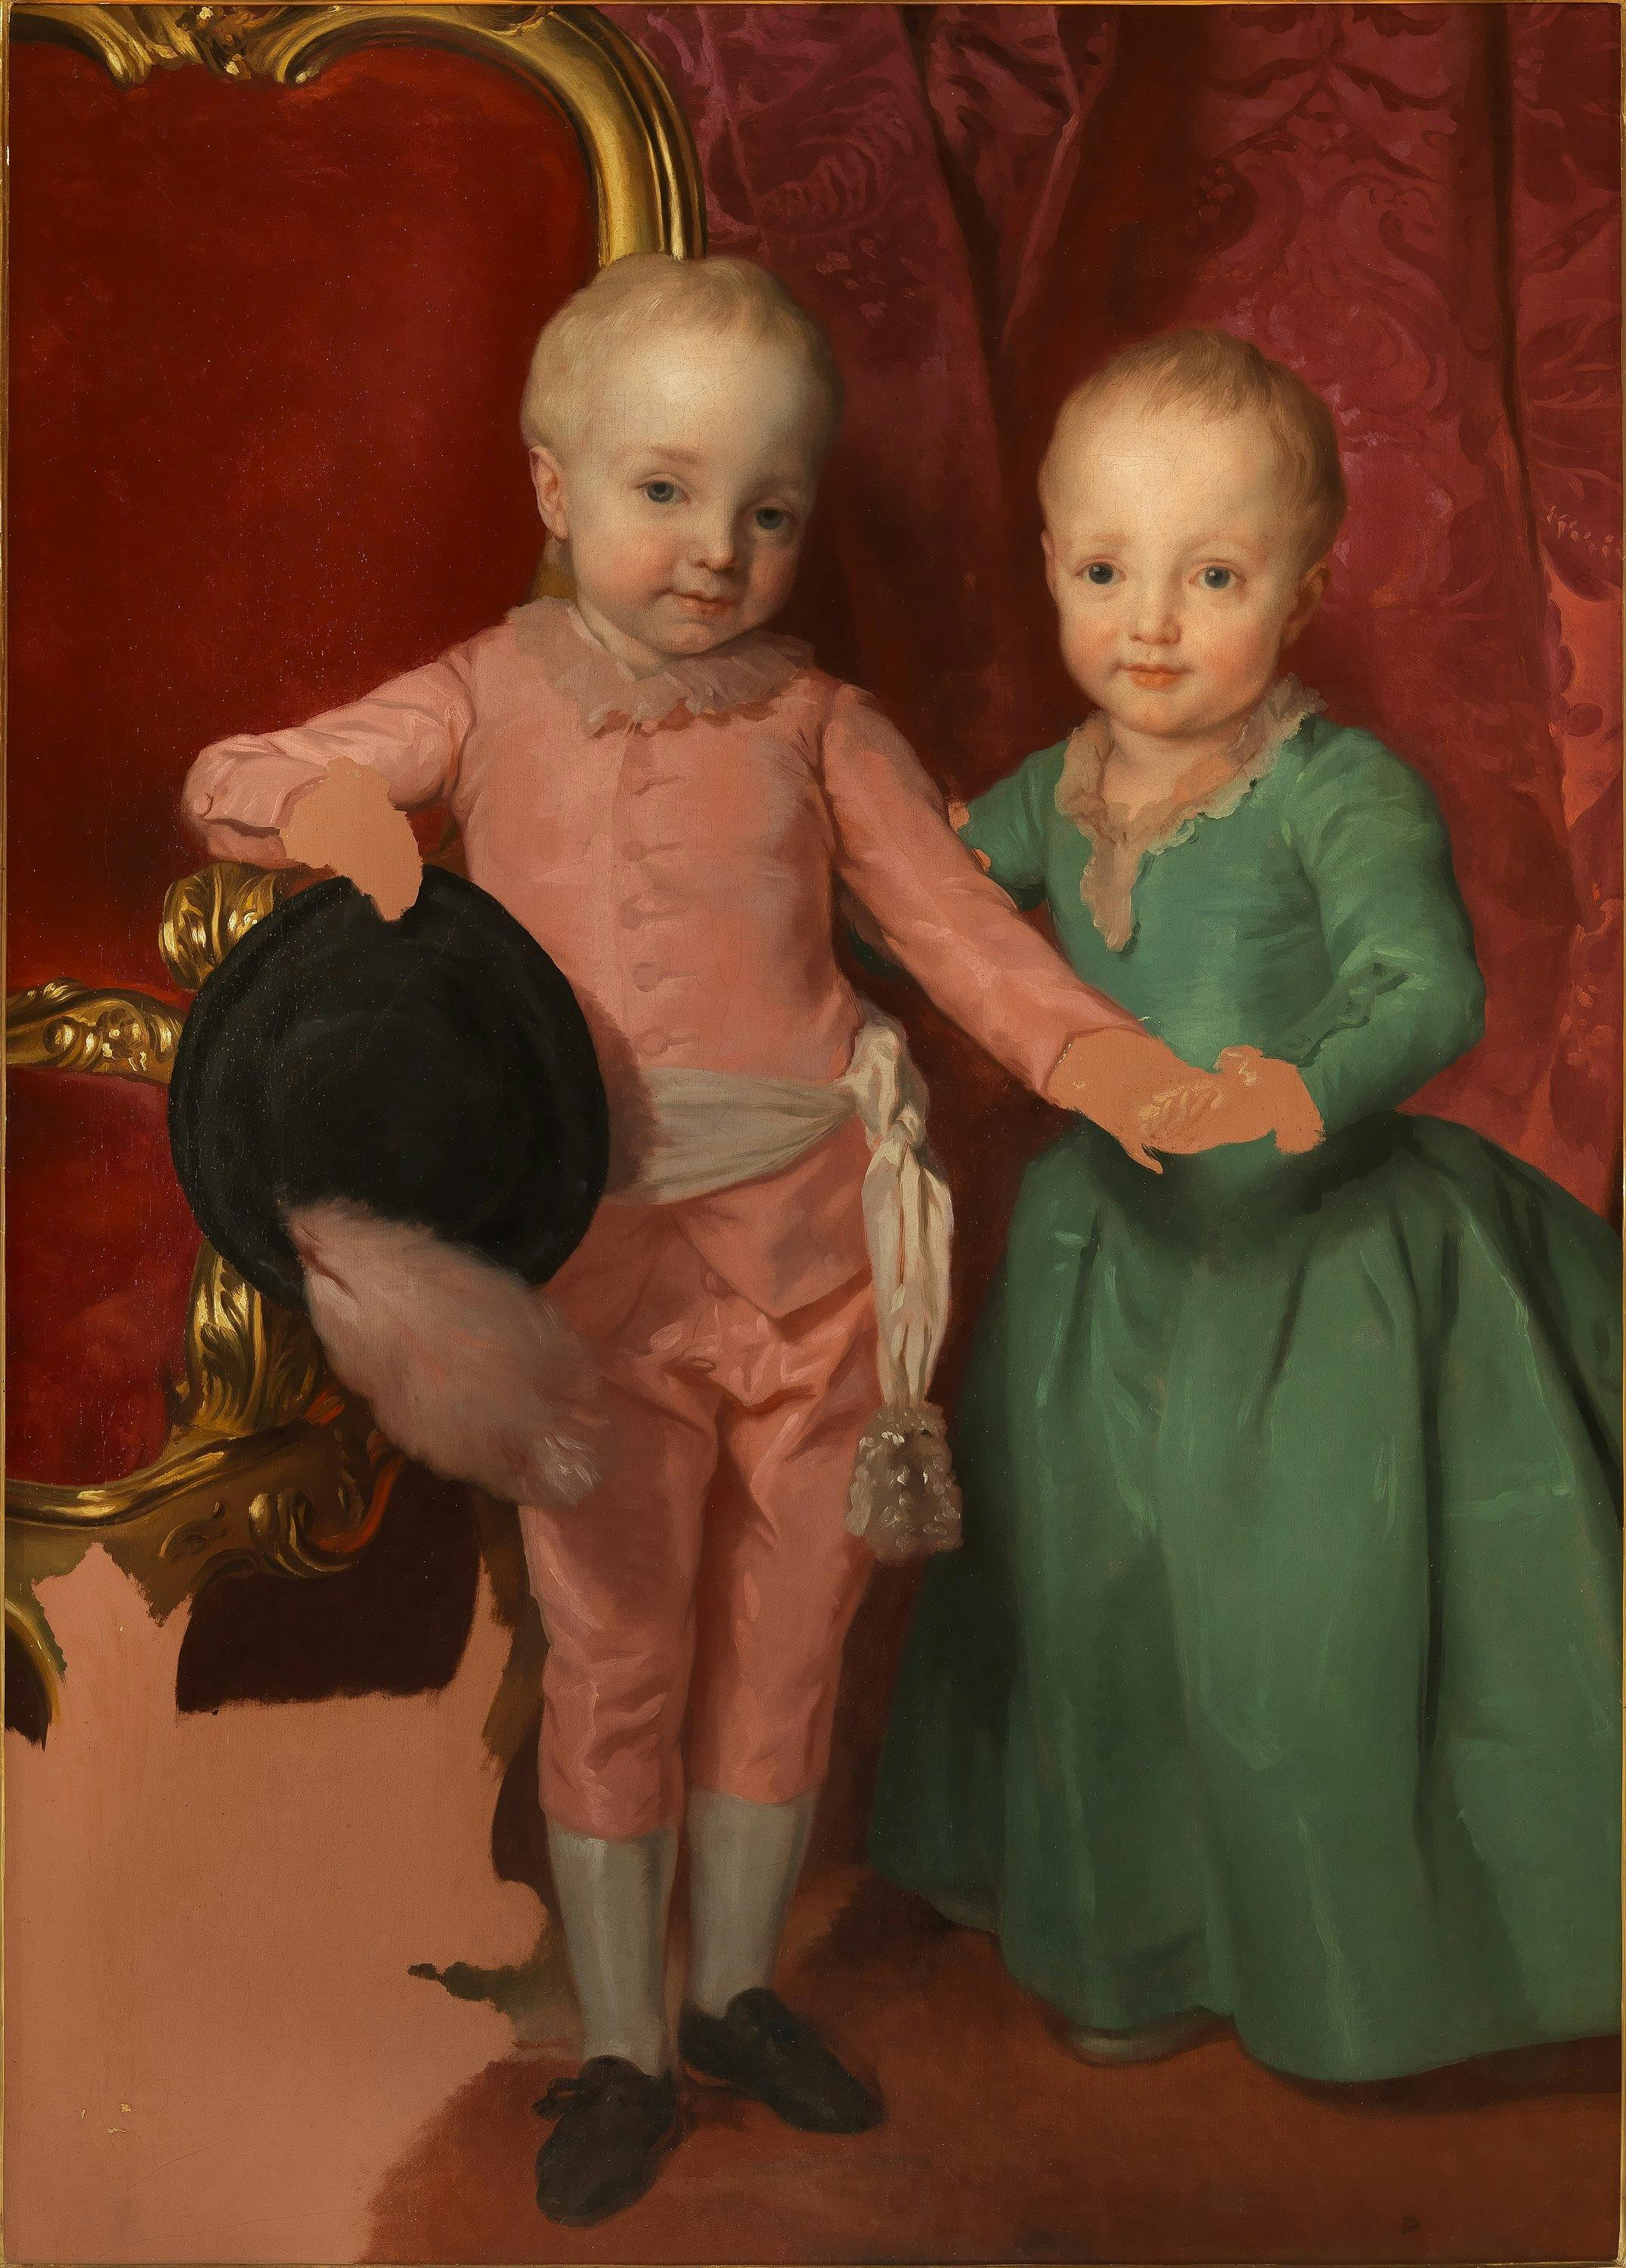 The King of Spain’s Grandchildren: Anton Raphael Mengs and Florence